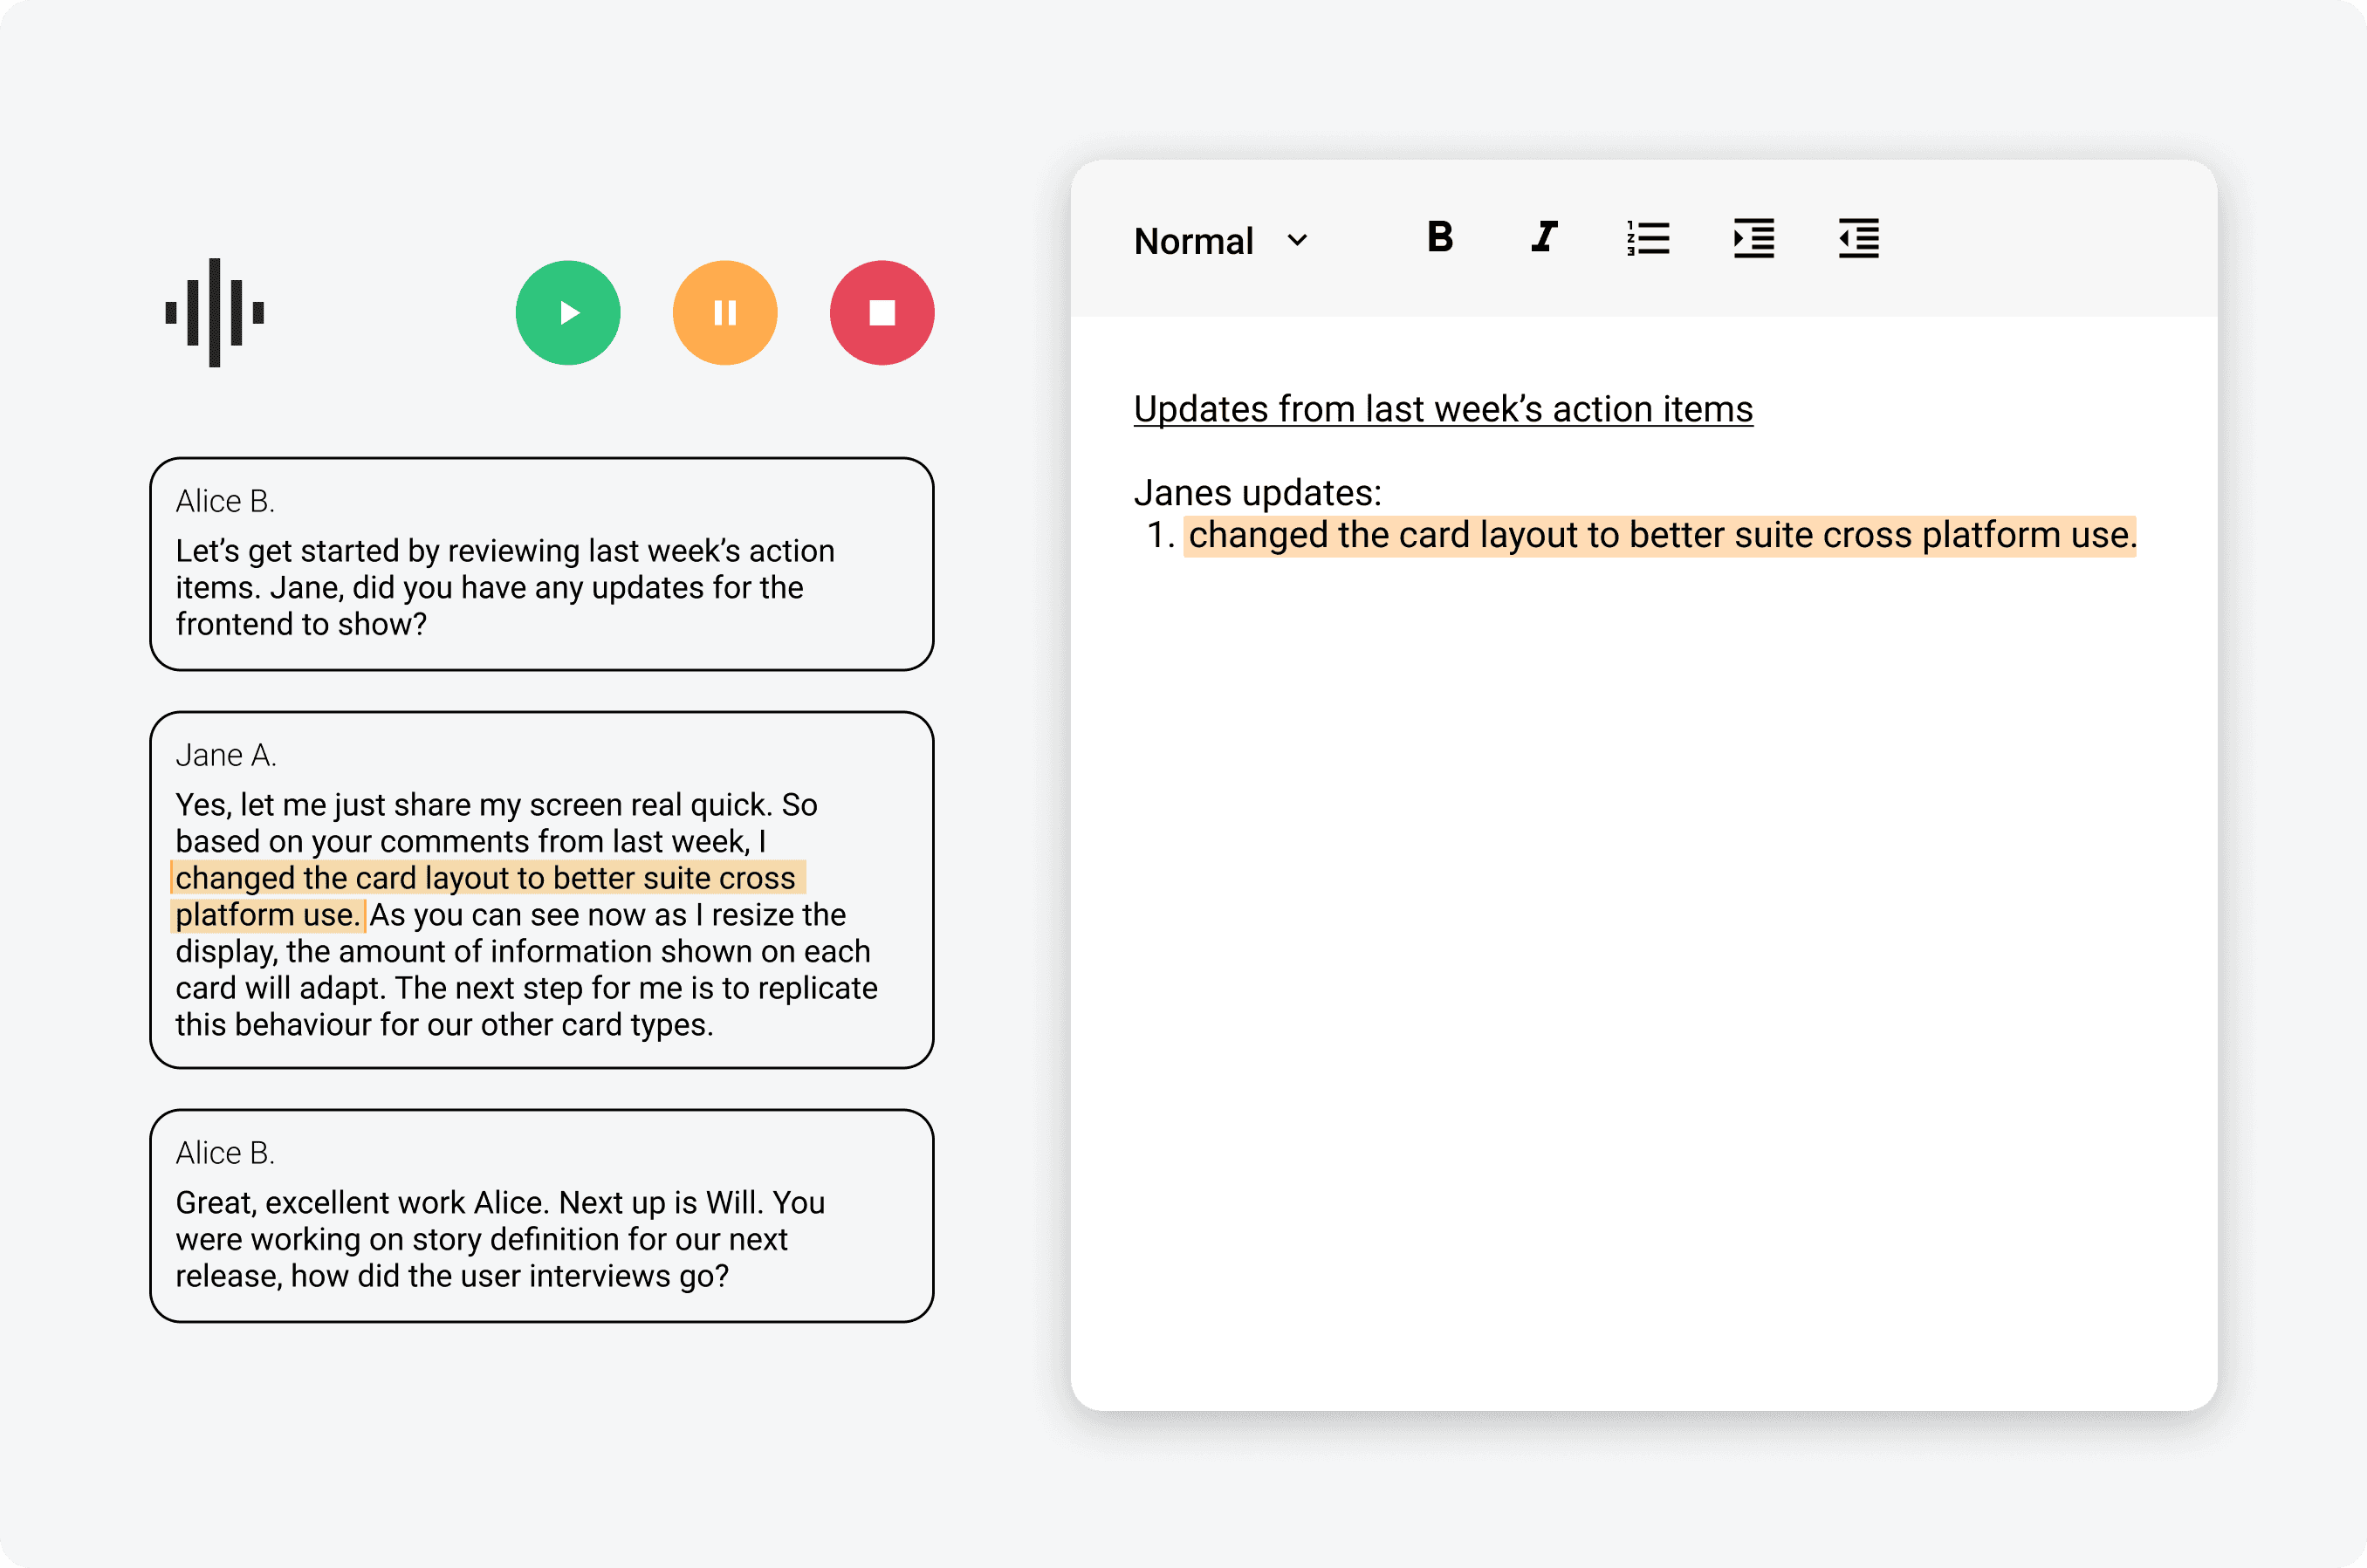 Copy and paste text directly from Knowtworthy real-time transcripts into your minutes.